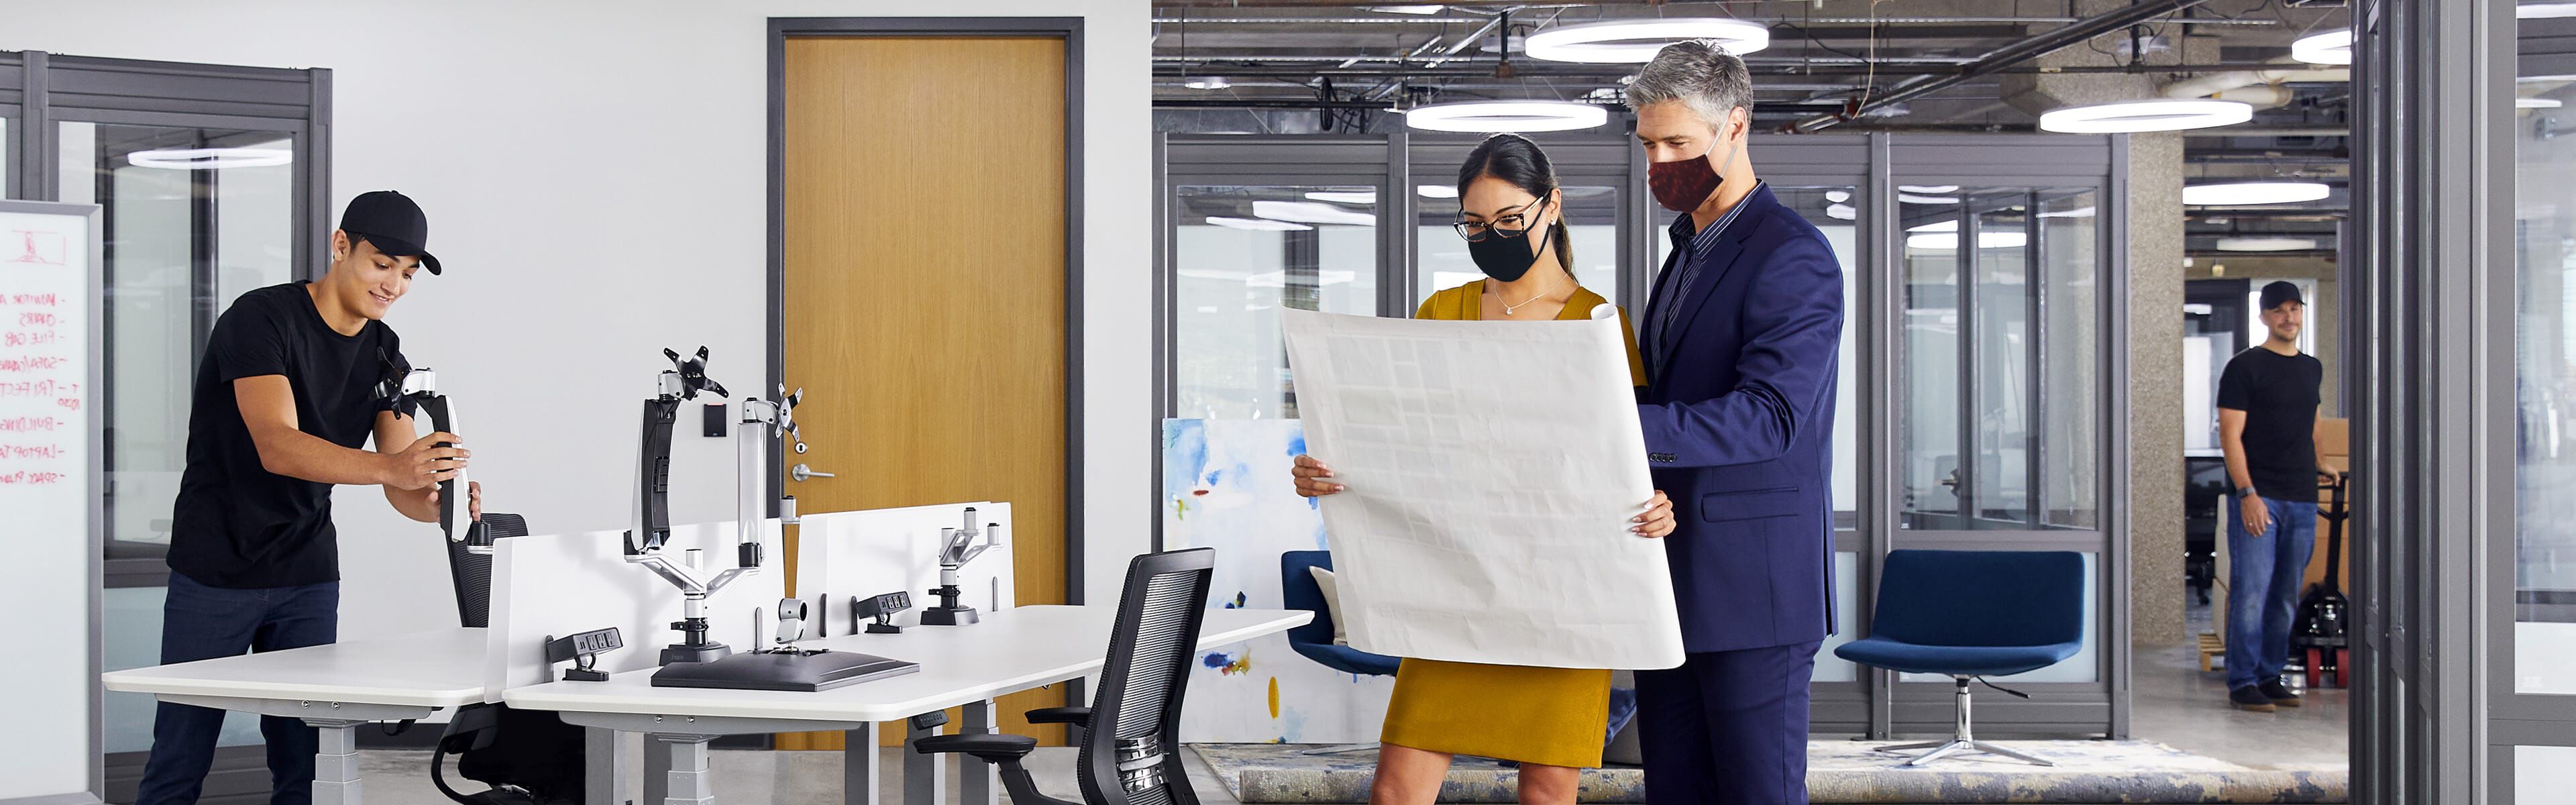 people reviewing a space plan in an office undergoing a furniture design project